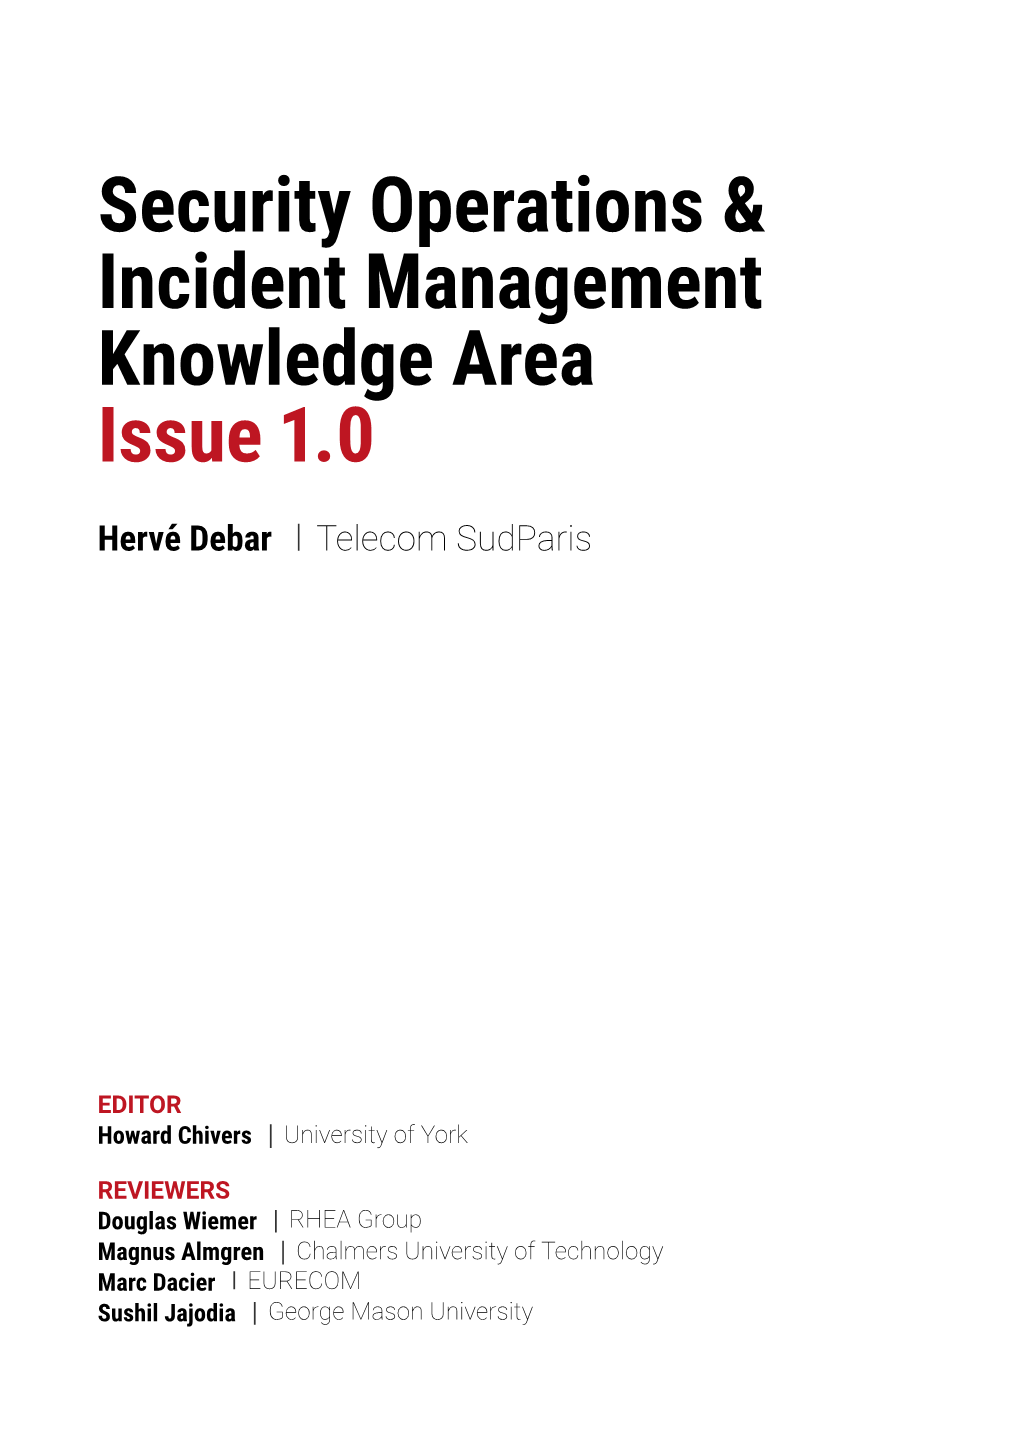 Security Operations & Incident Management